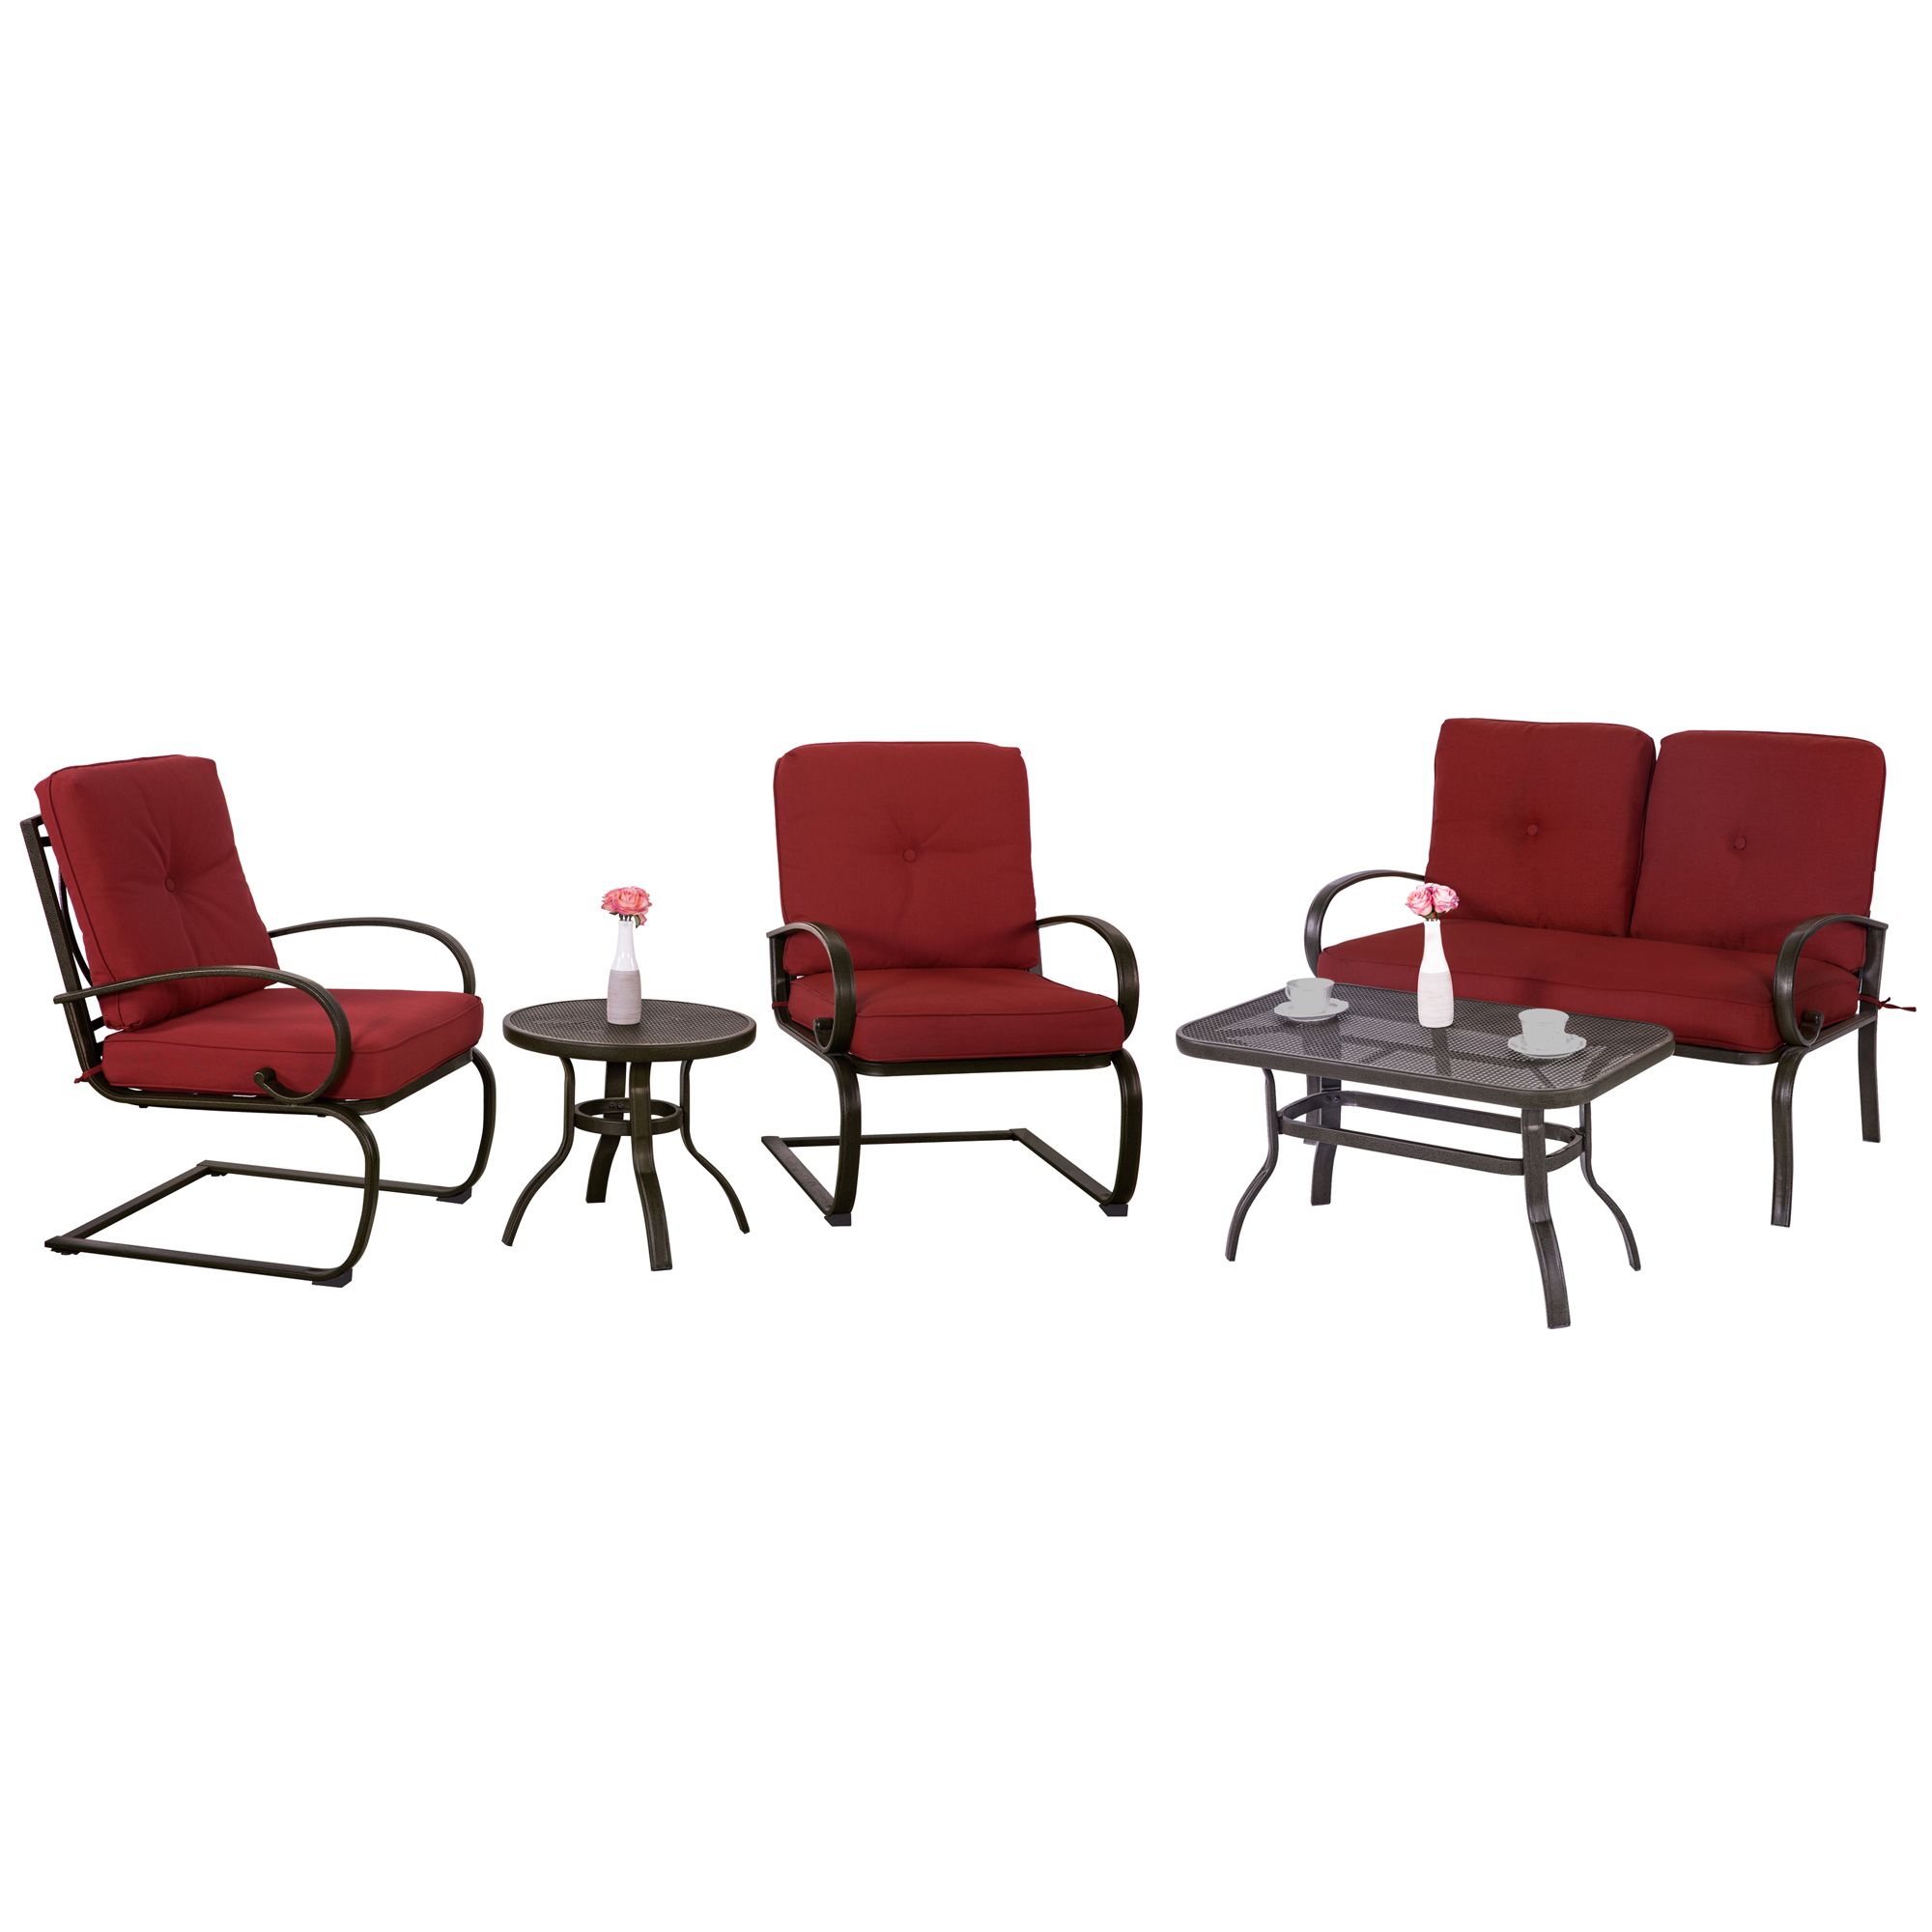 Preferred Finefind 5 Piece Cushioned Outdoor Furniture Garden Patio Conversation Intended For Red Loveseat Outdoor Conversation Sets (View 11 of 15)